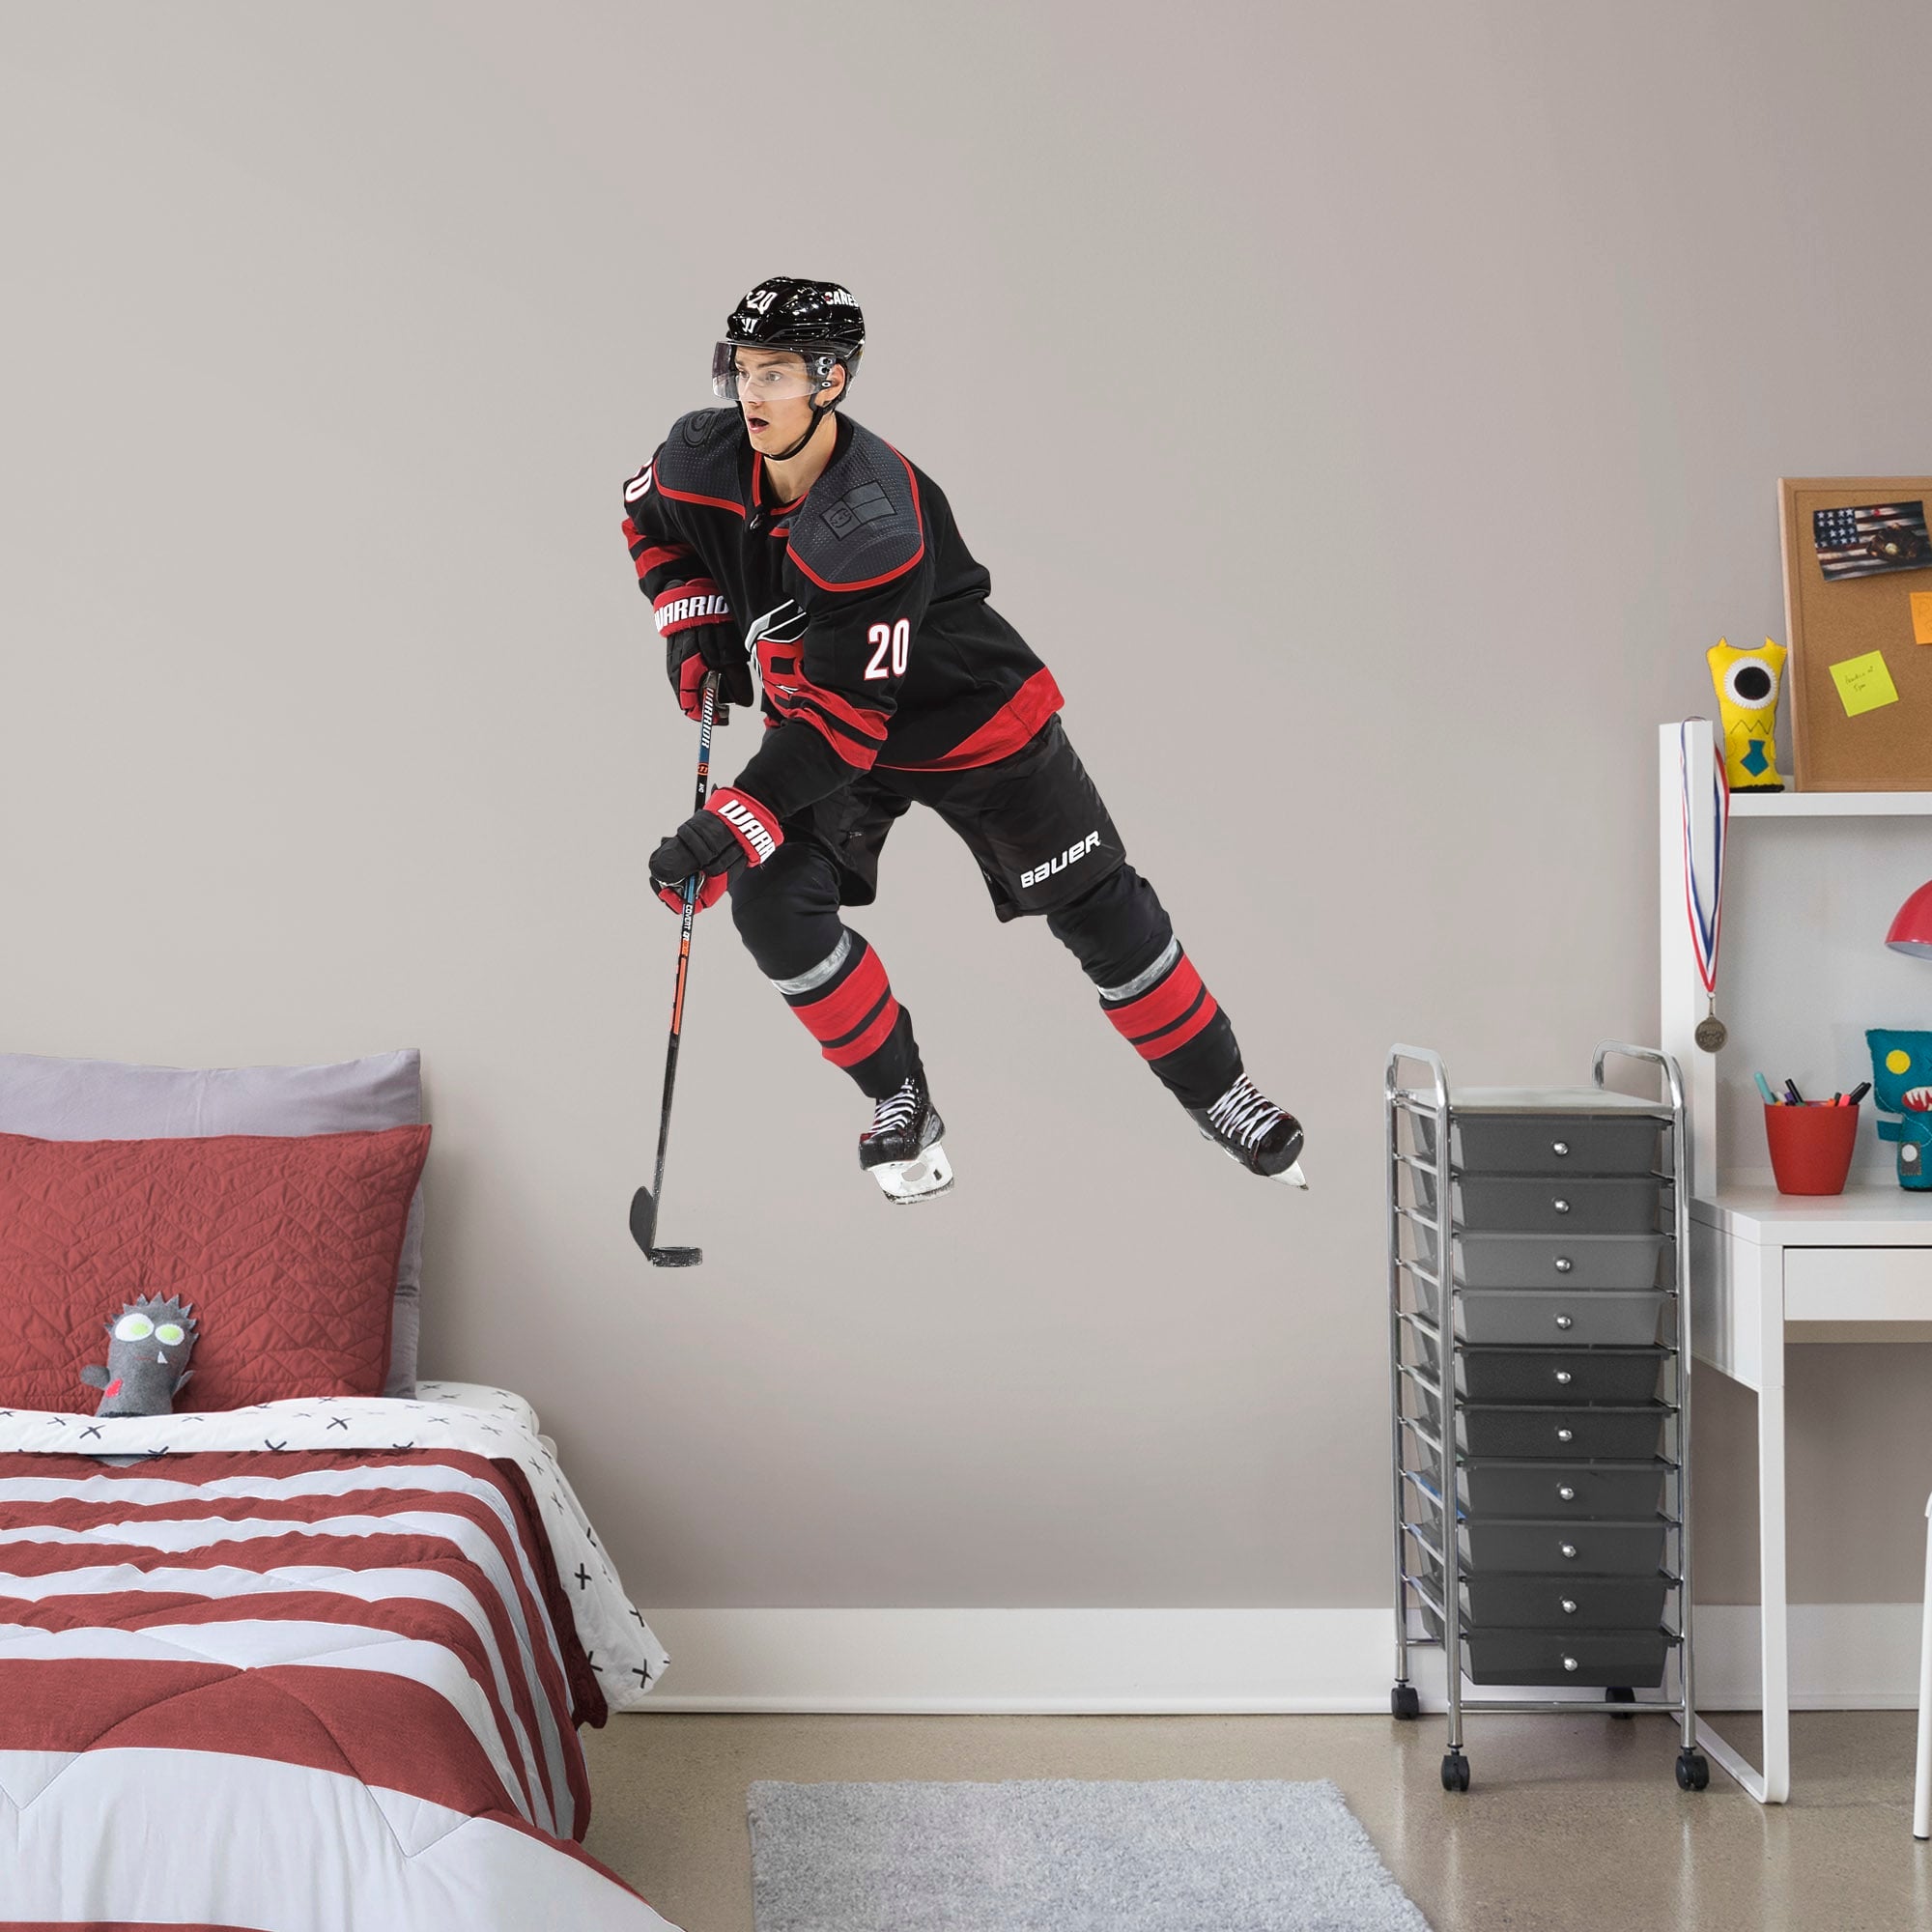 Sebastian Aho for Carolina Hurricanes - Officially Licensed NHL Removable Wall Decal Giant Athlete + 2 Decals (44"W x 56"H) by F